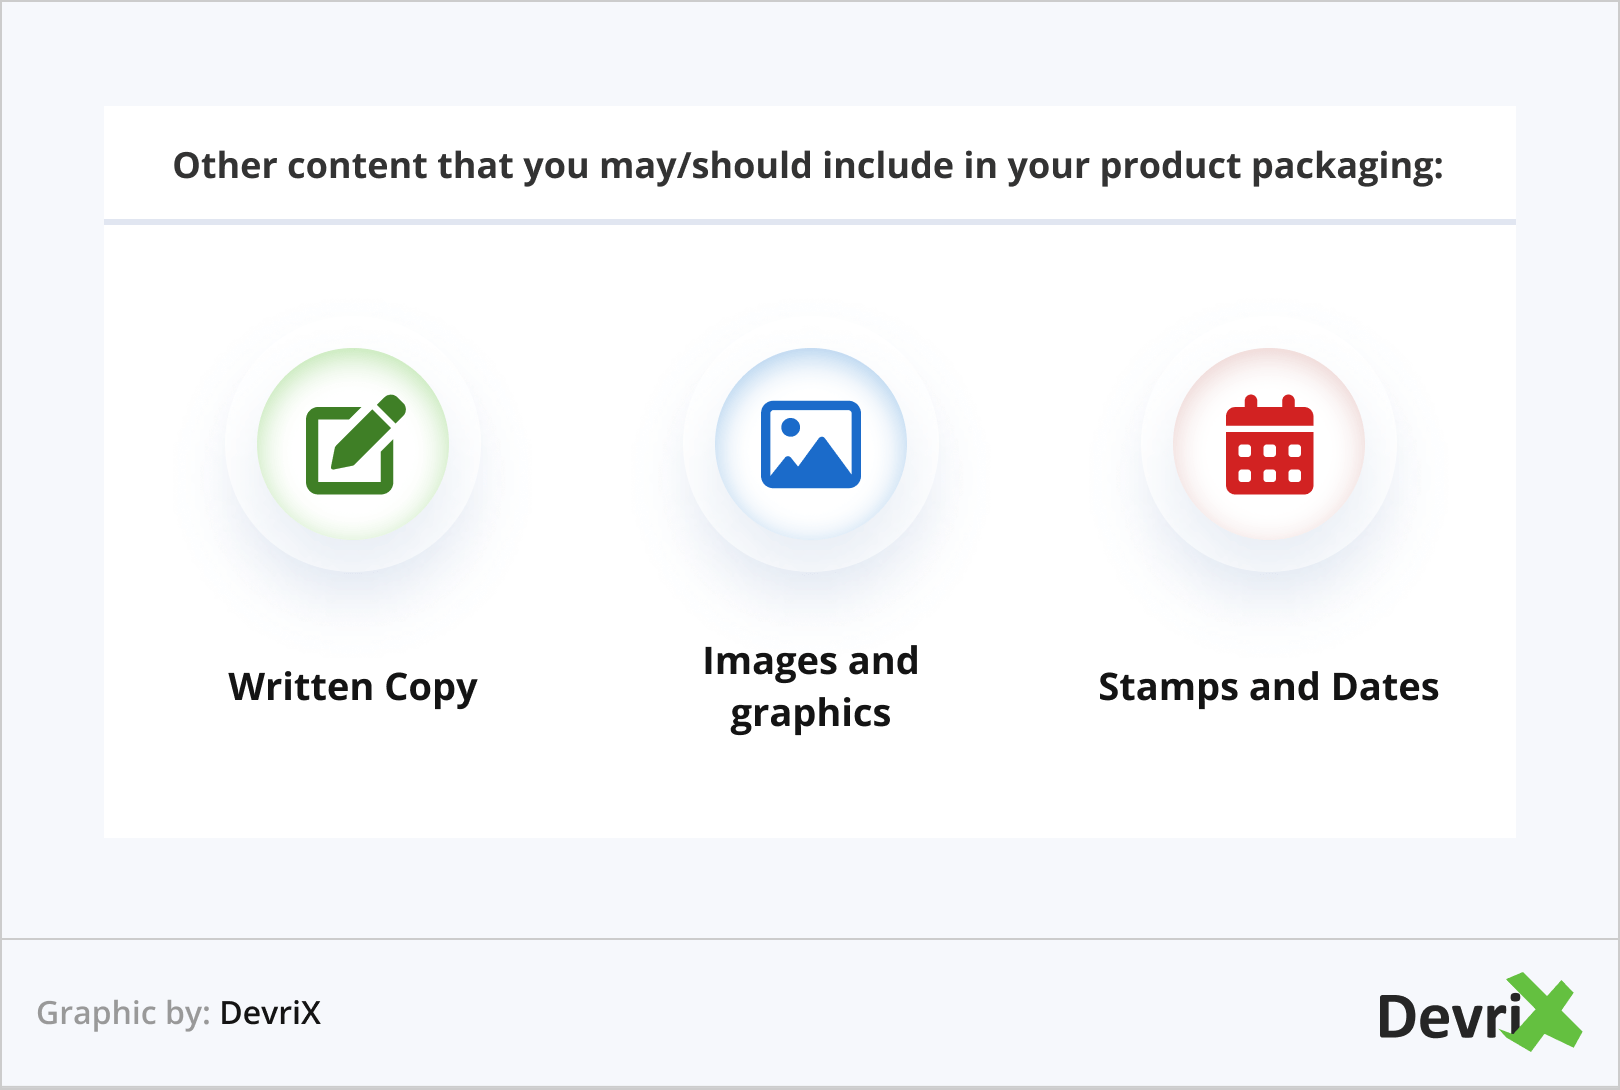 Content that you may include in your product packaging